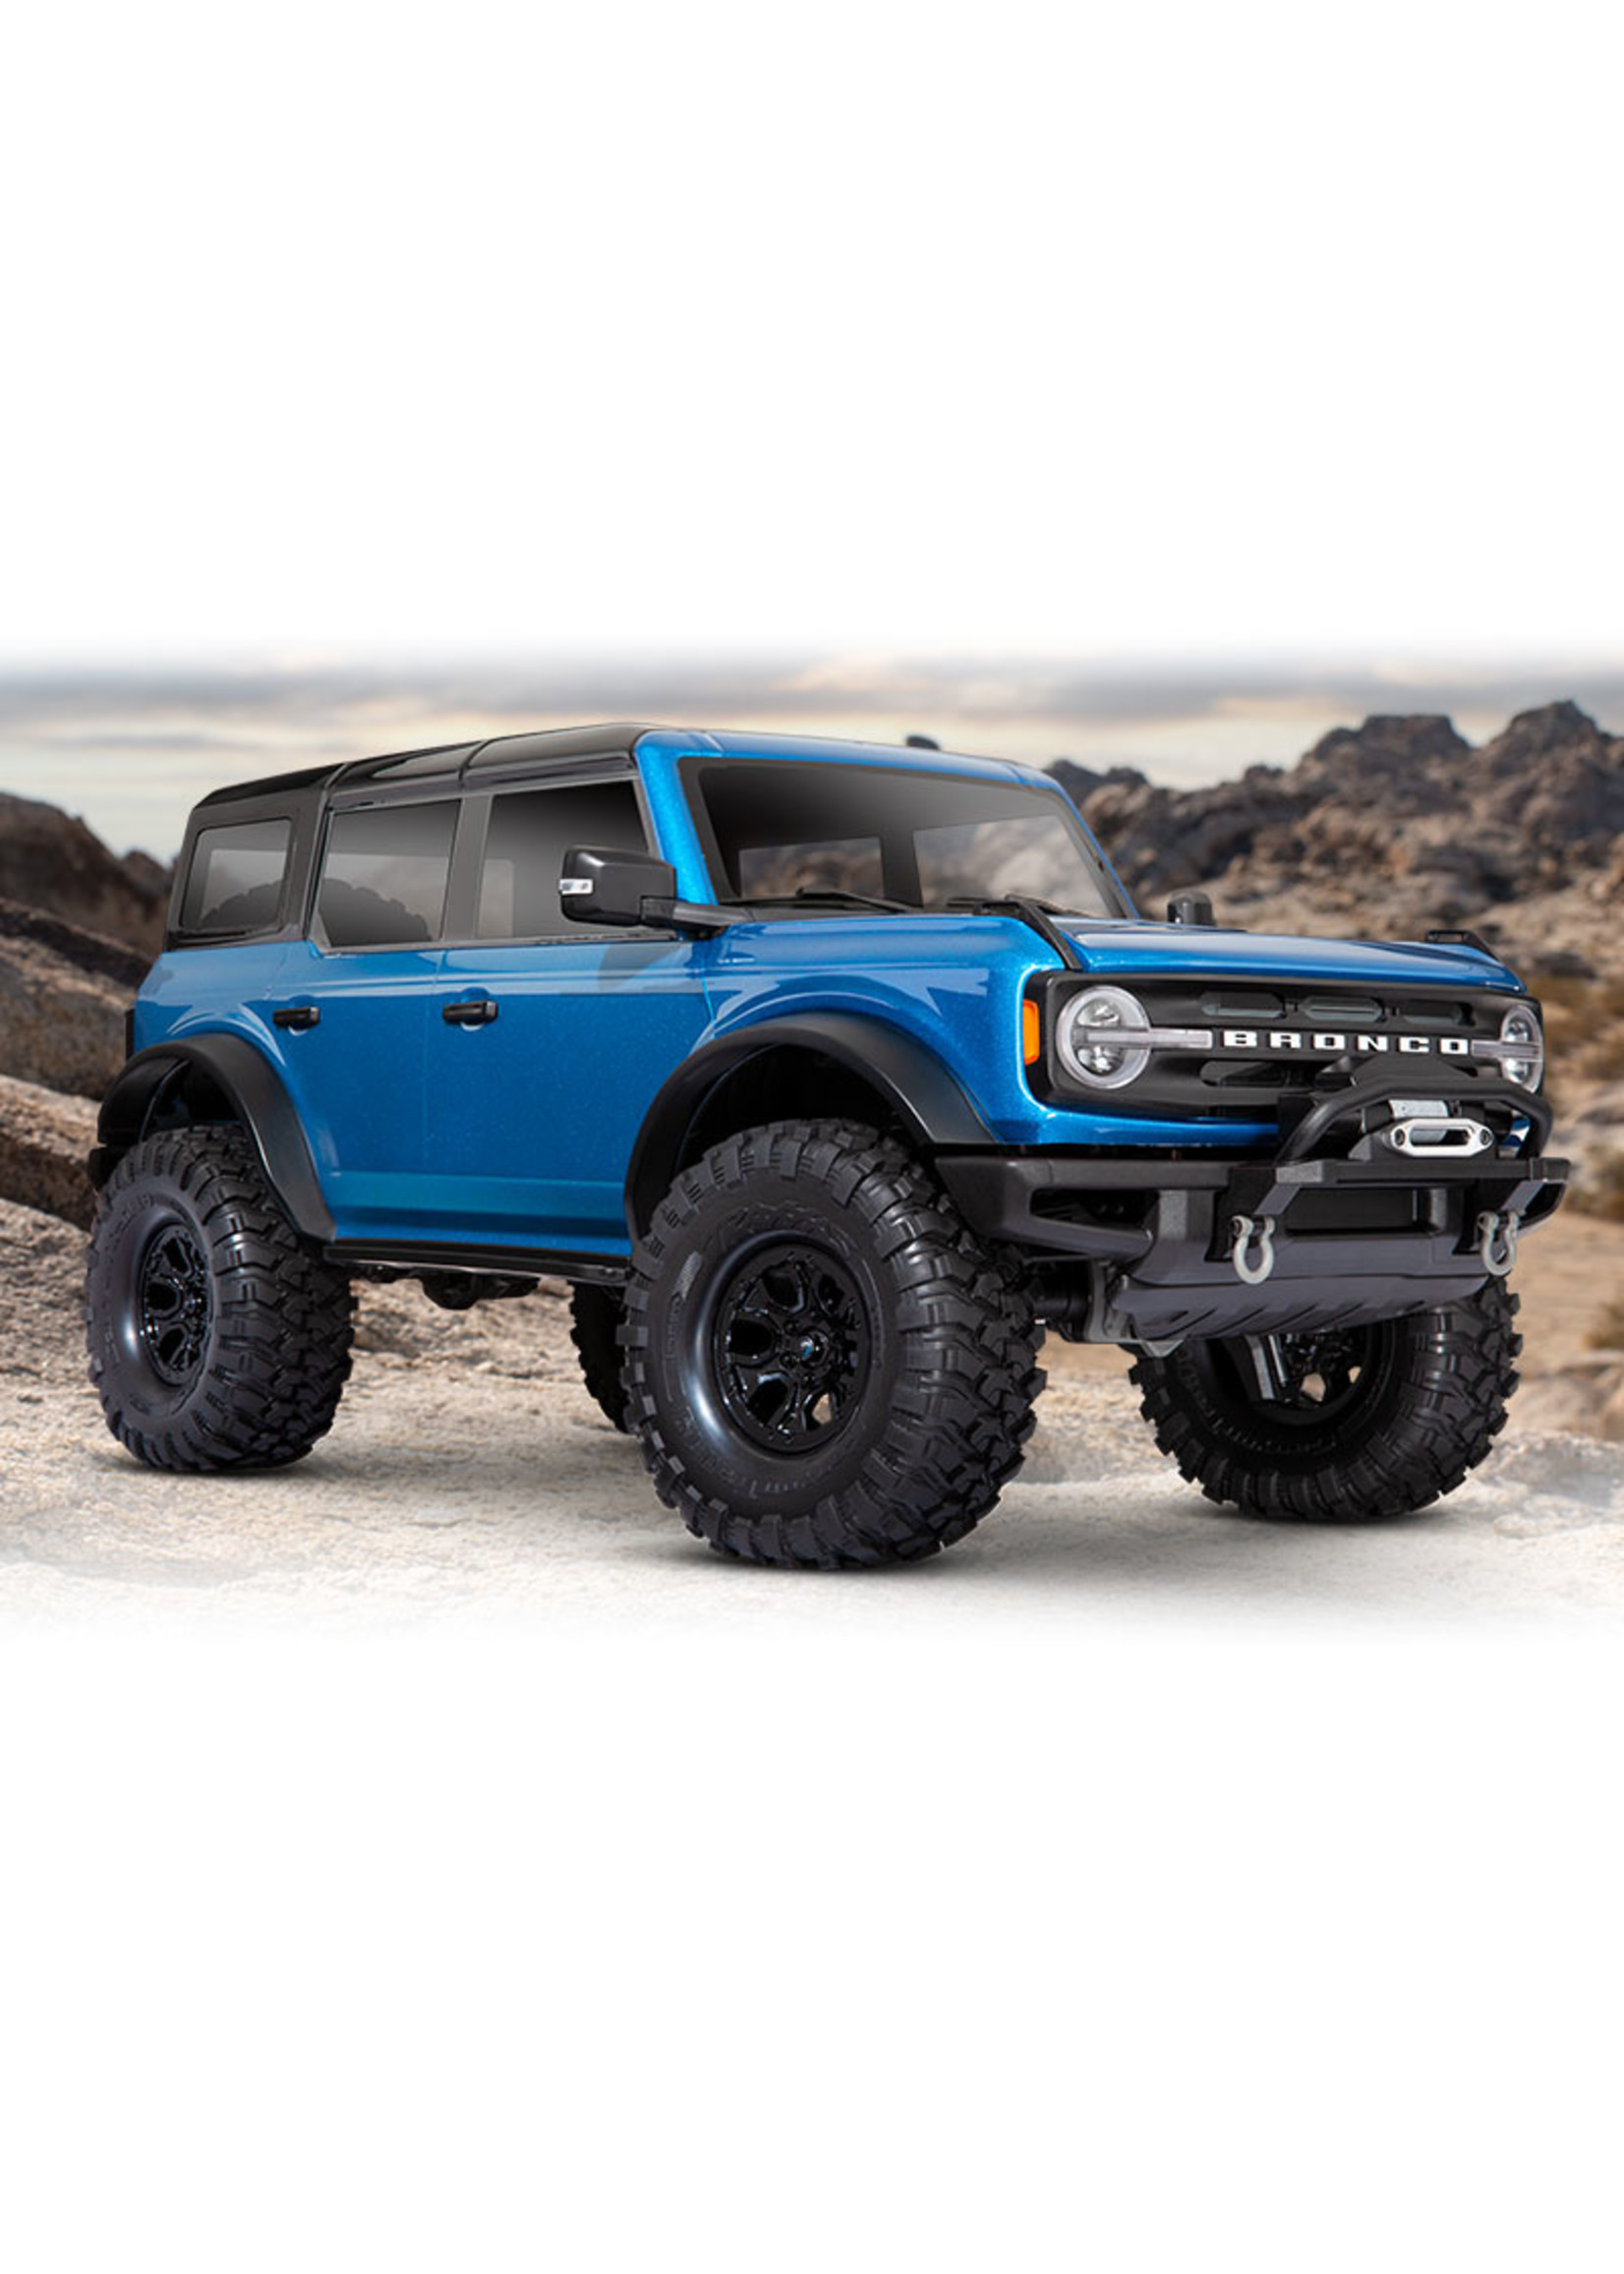 Traxxas 1/10 TRX-4 2021 Bronco Scale and Trail Crawler RTR - Velocity Blue